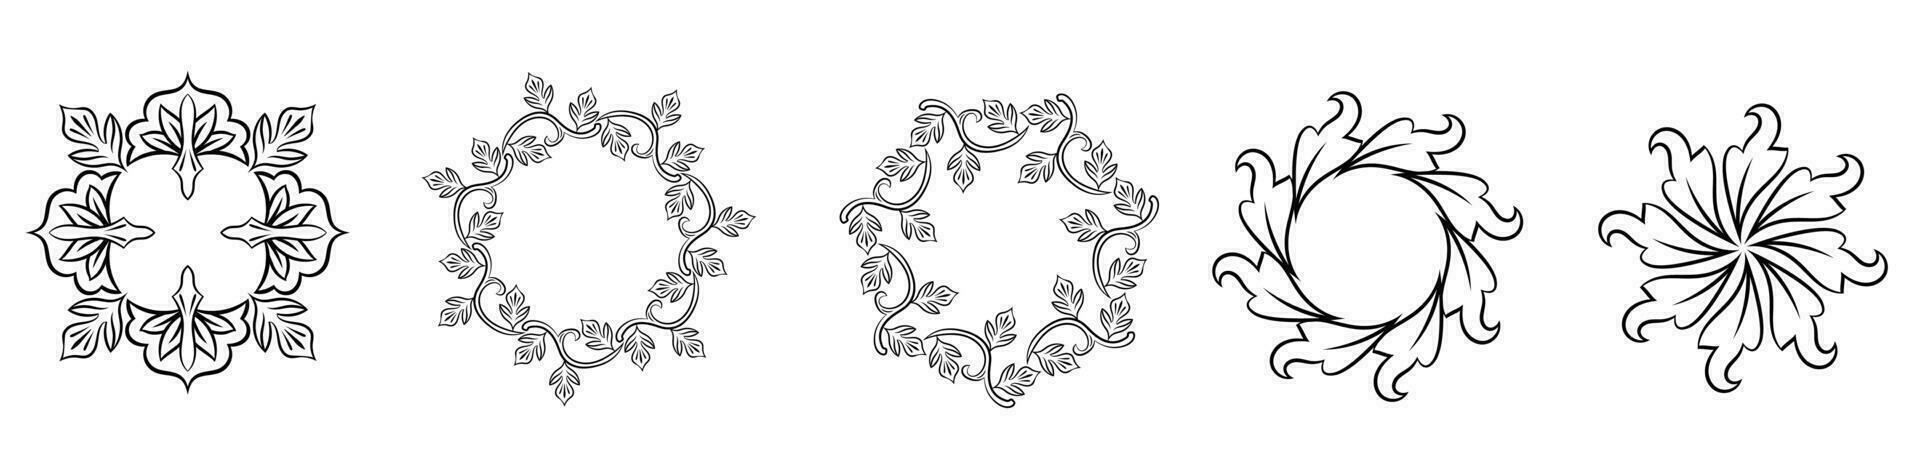 Circular decorative elements for related graphic purpose. Circular frame ornamental graphic elements. vector